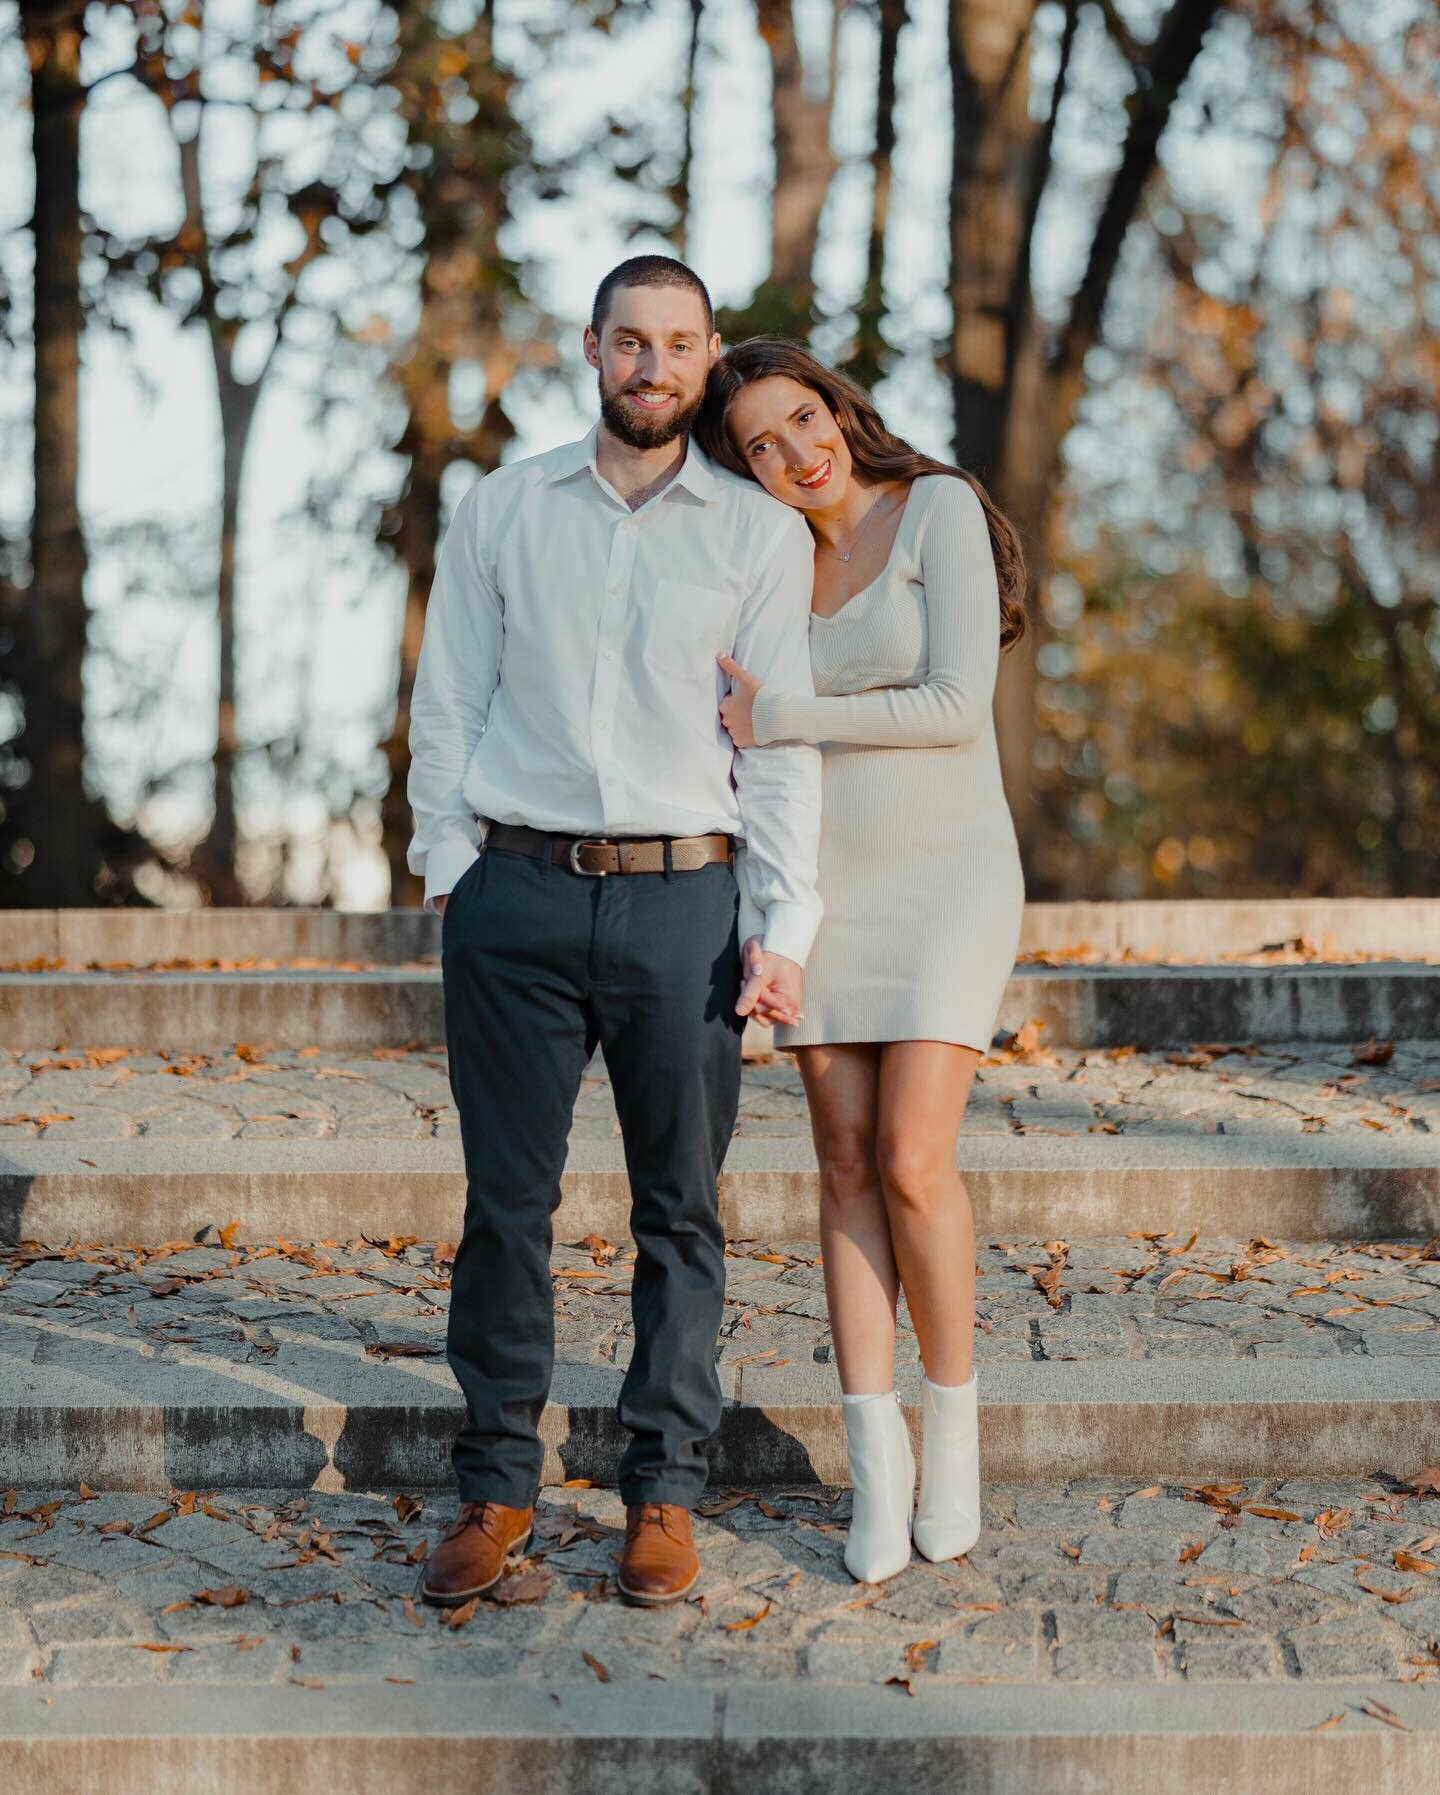 ‼️ 3 Reasons Why You Should Do Engagement Photoshoots at Theodore Roosevelt Island During Winter ‼️

It offers a unique setting for engagement sessions, with several appealing features:

1. Winter Wonderland Setting: The winter season transforms Theo